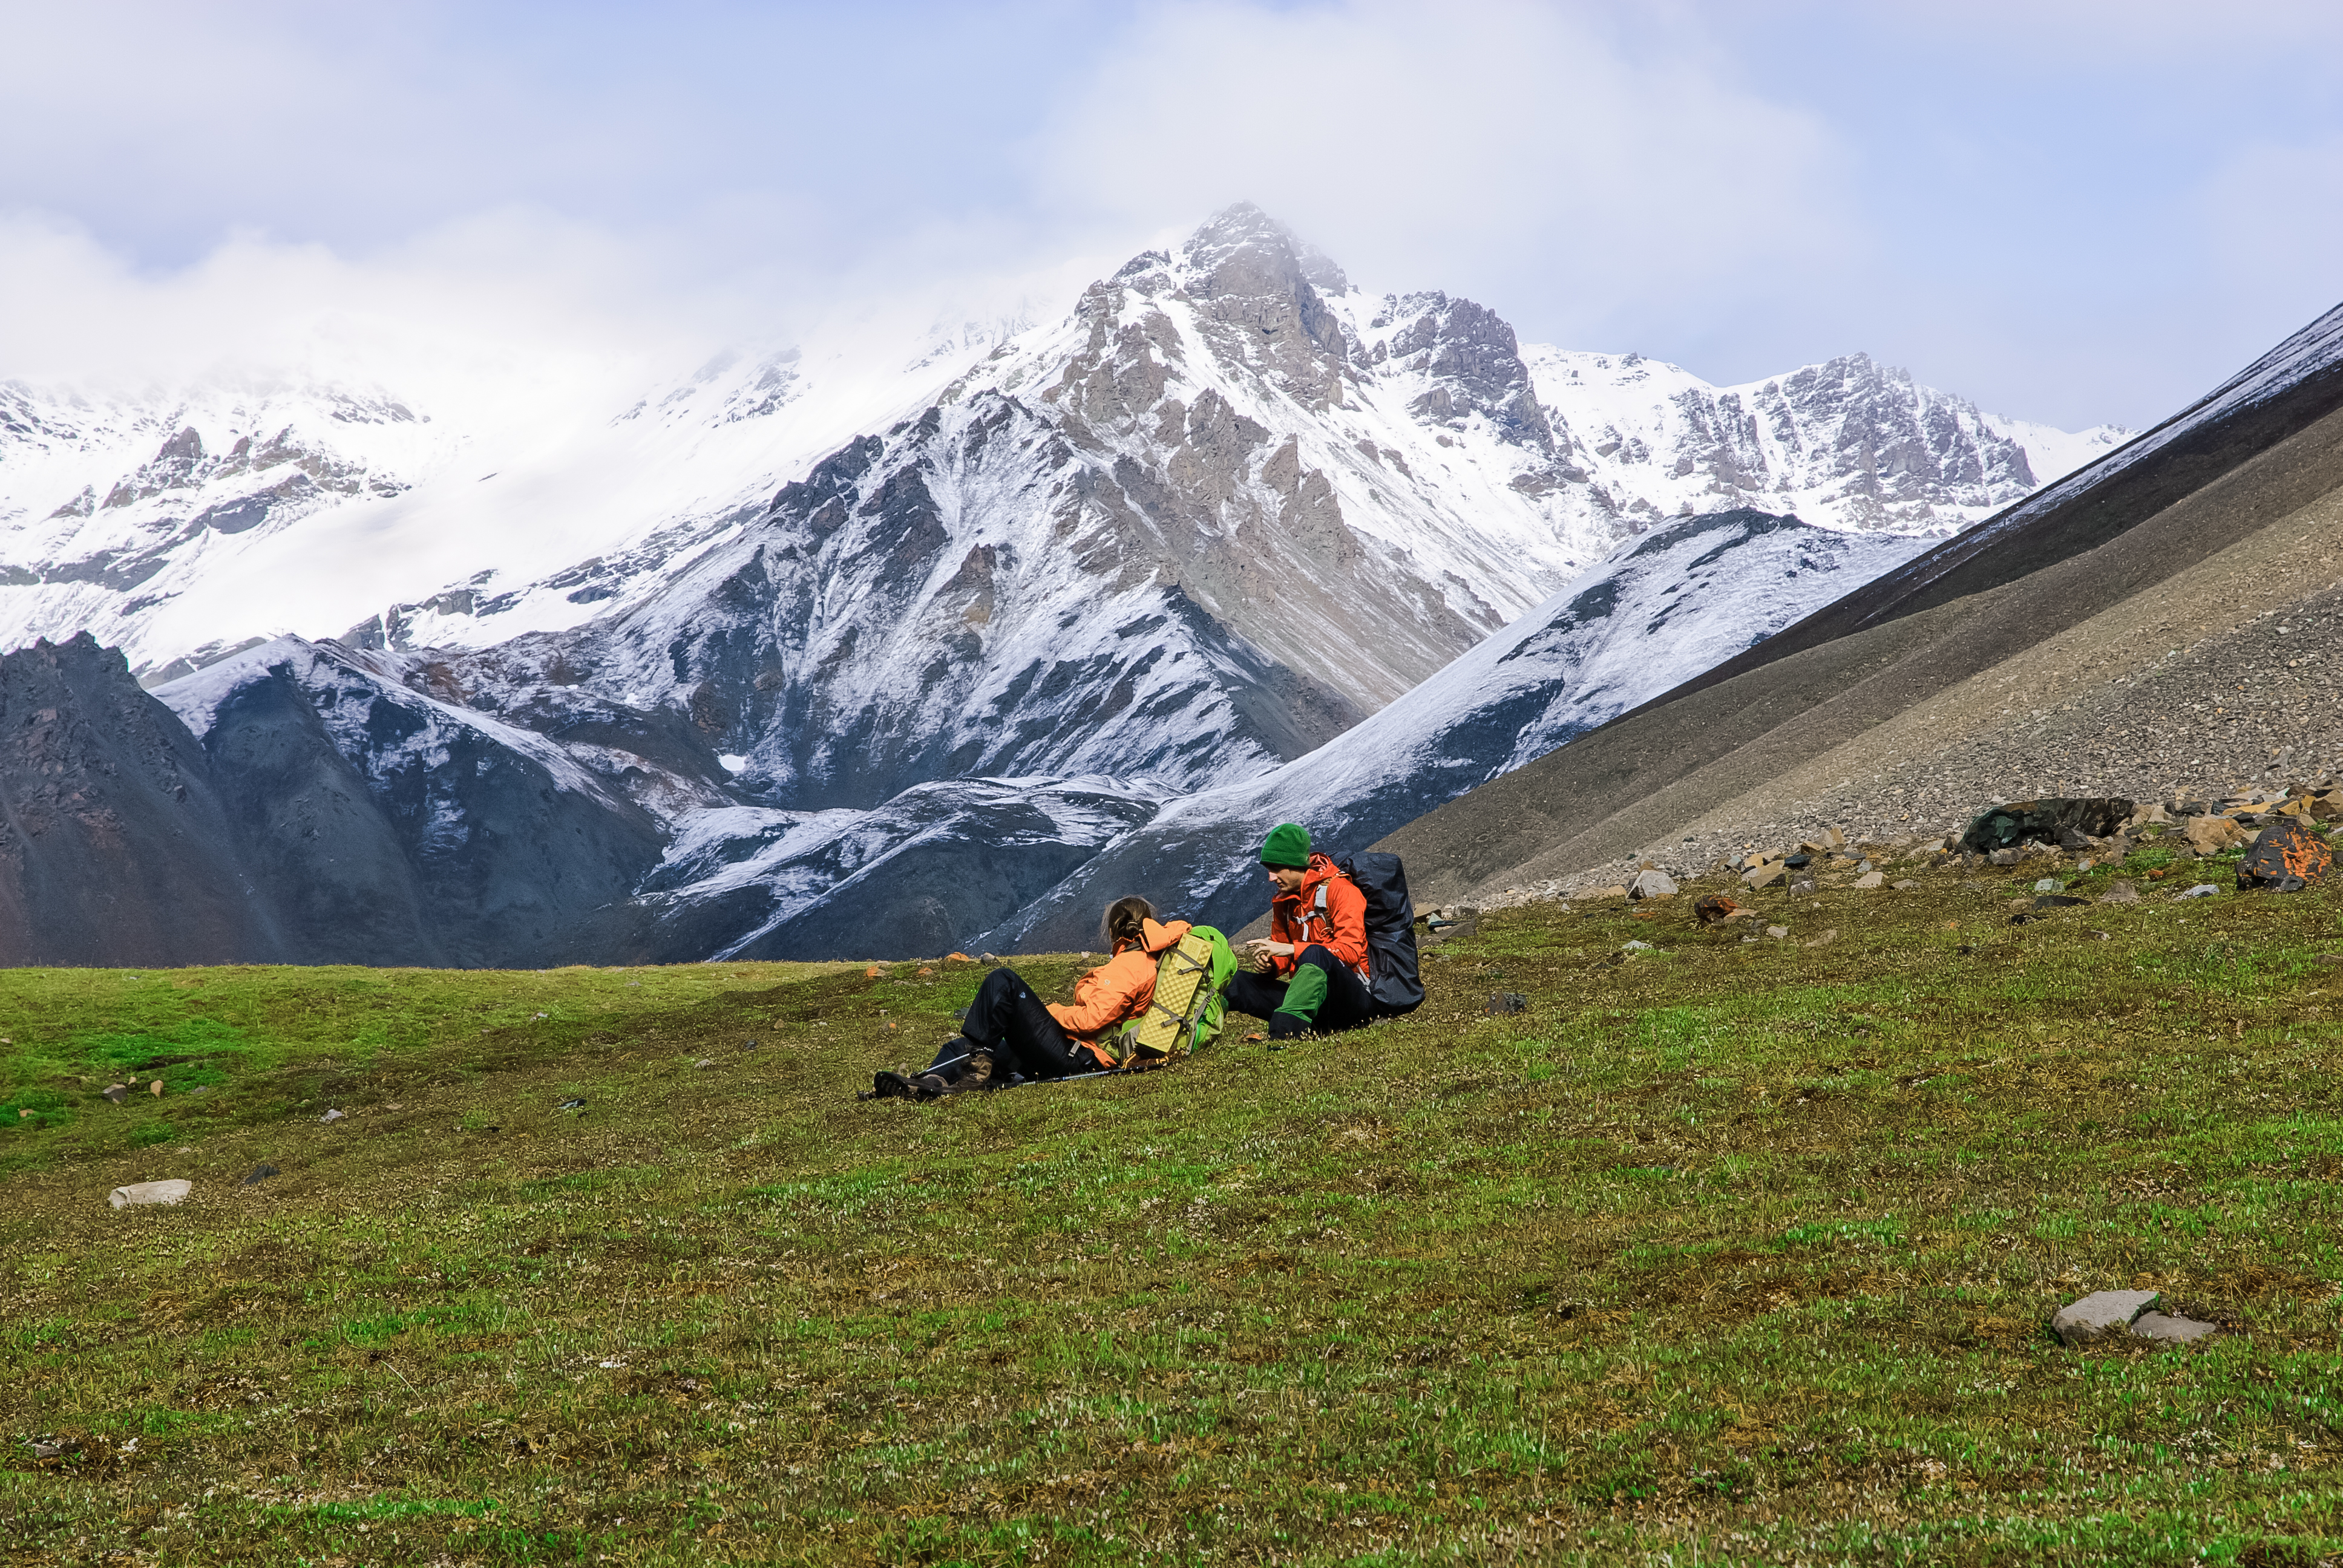 Two backpackers sitting in an alpine meadow with snowy mountains in the background